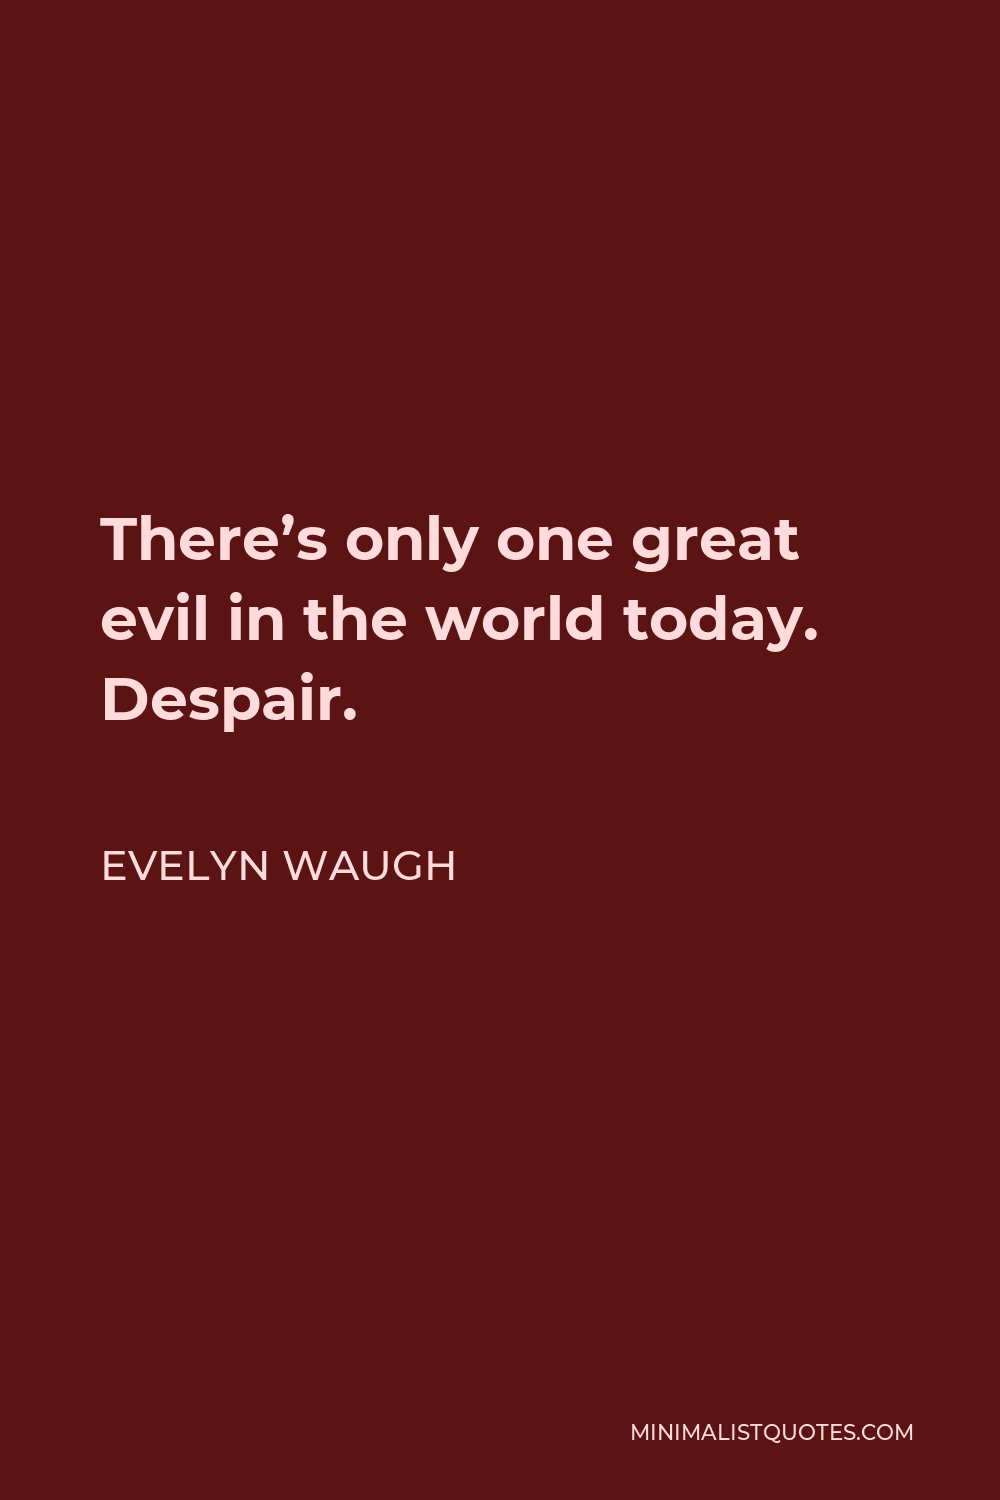 Evelyn Waugh Quote - There’s only one great evil in the world today. Despair.